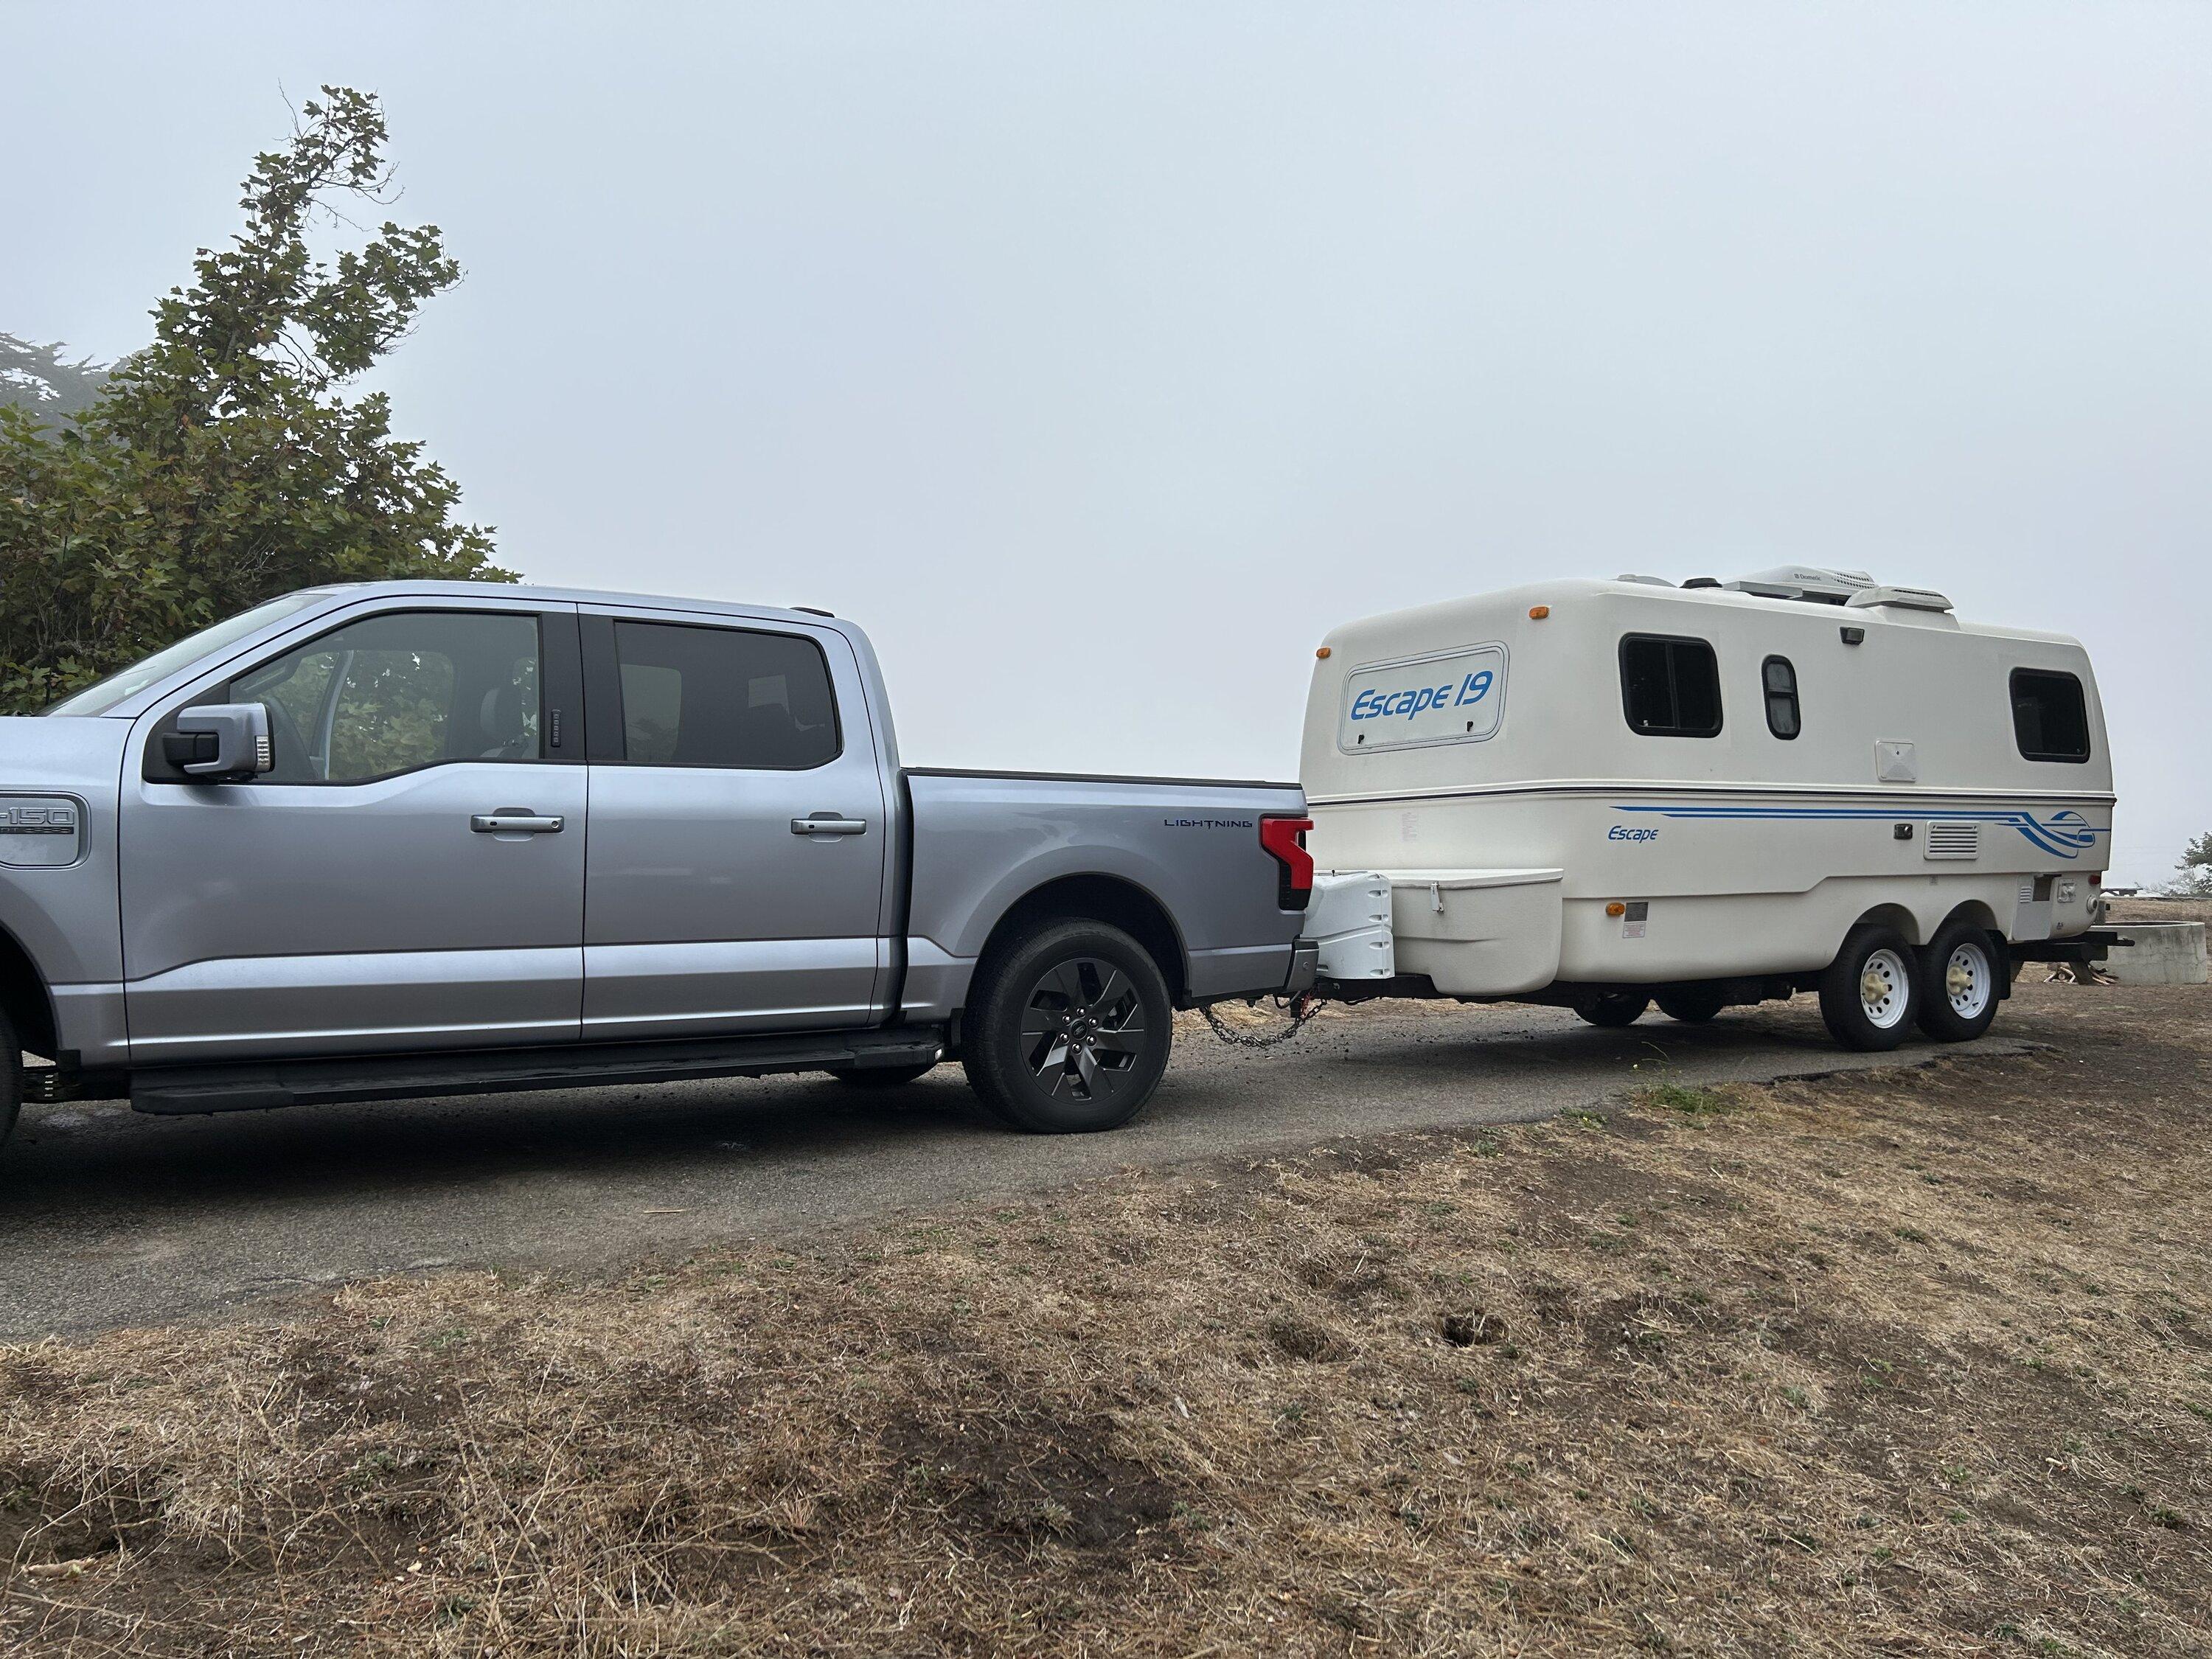 Ford F-150 Lightning Towing a 19’ Escape Trailer and using Pro Power IMG_4018